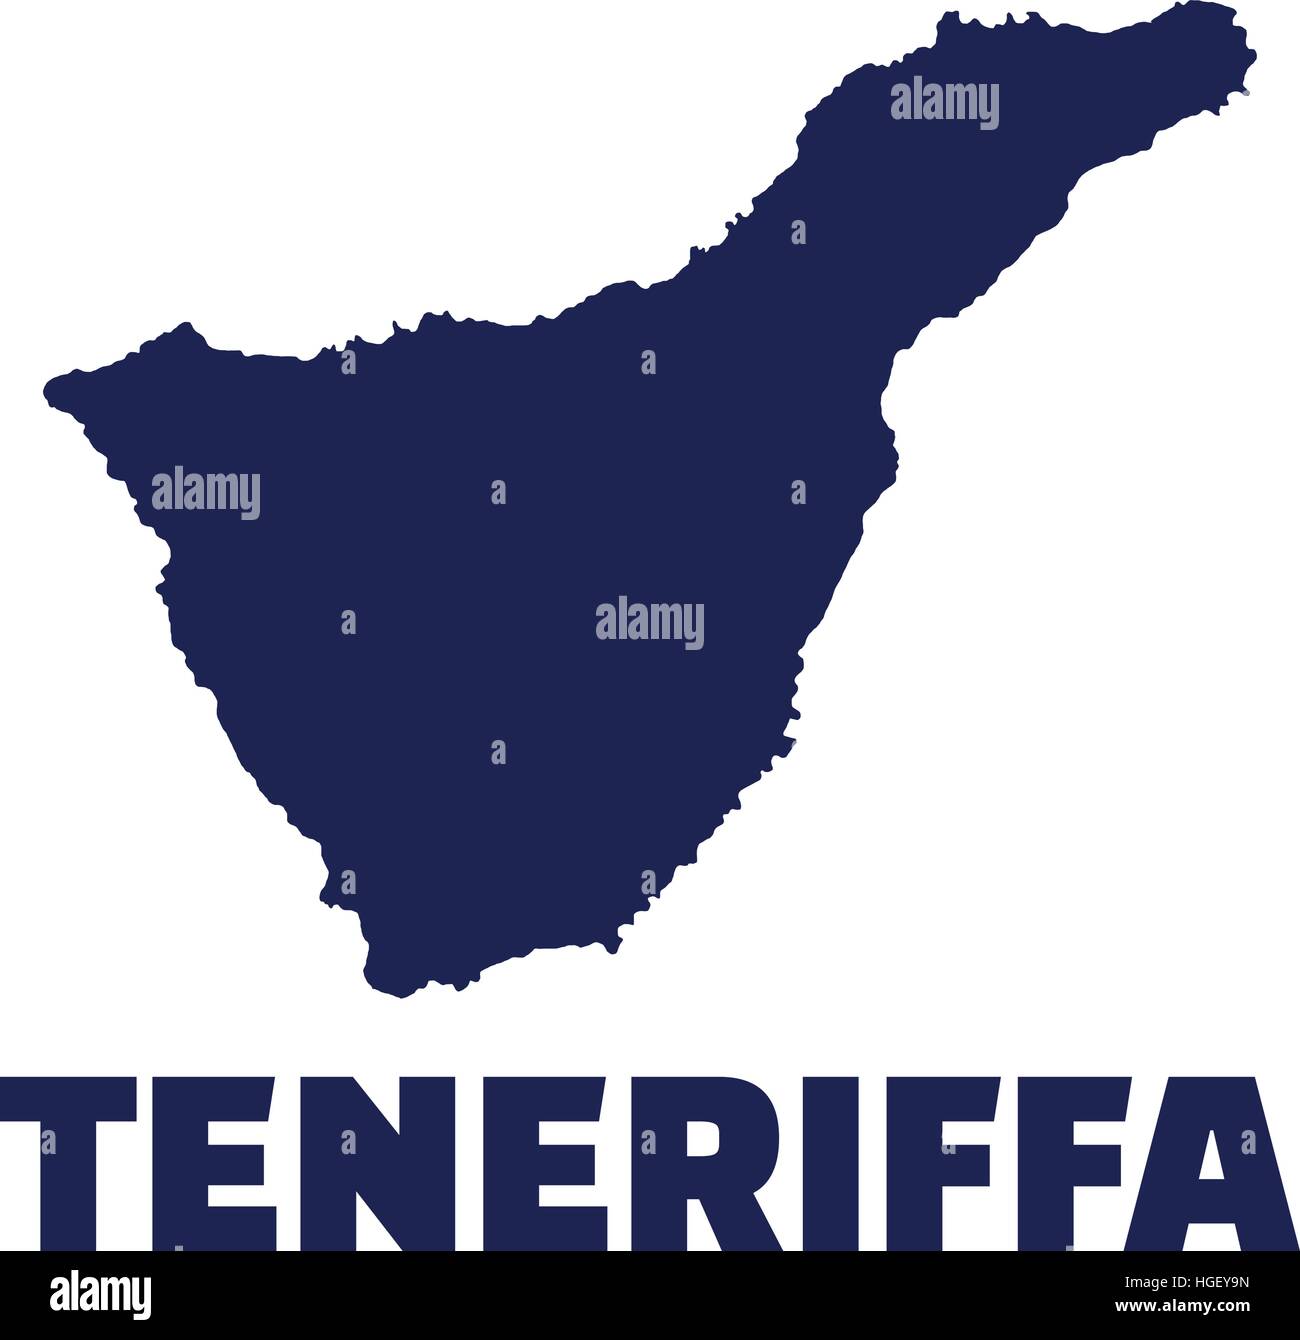 Tenerife map with name Stock Vector